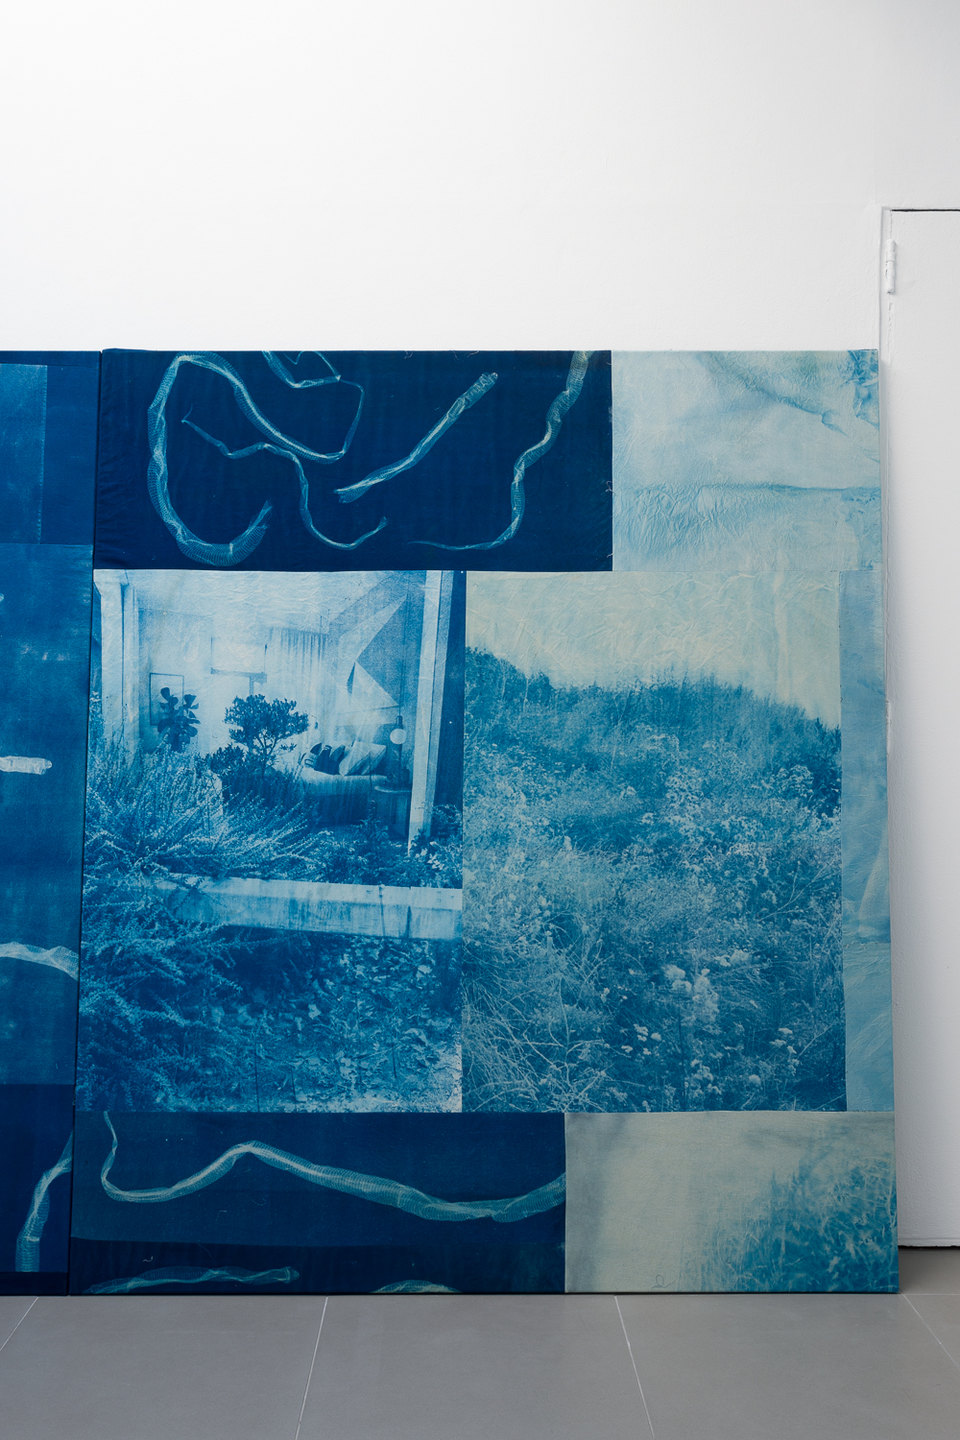 Felix Melia, Detail  'Plant Bed', from 'Stages', 2022, cyanotype print on cotton